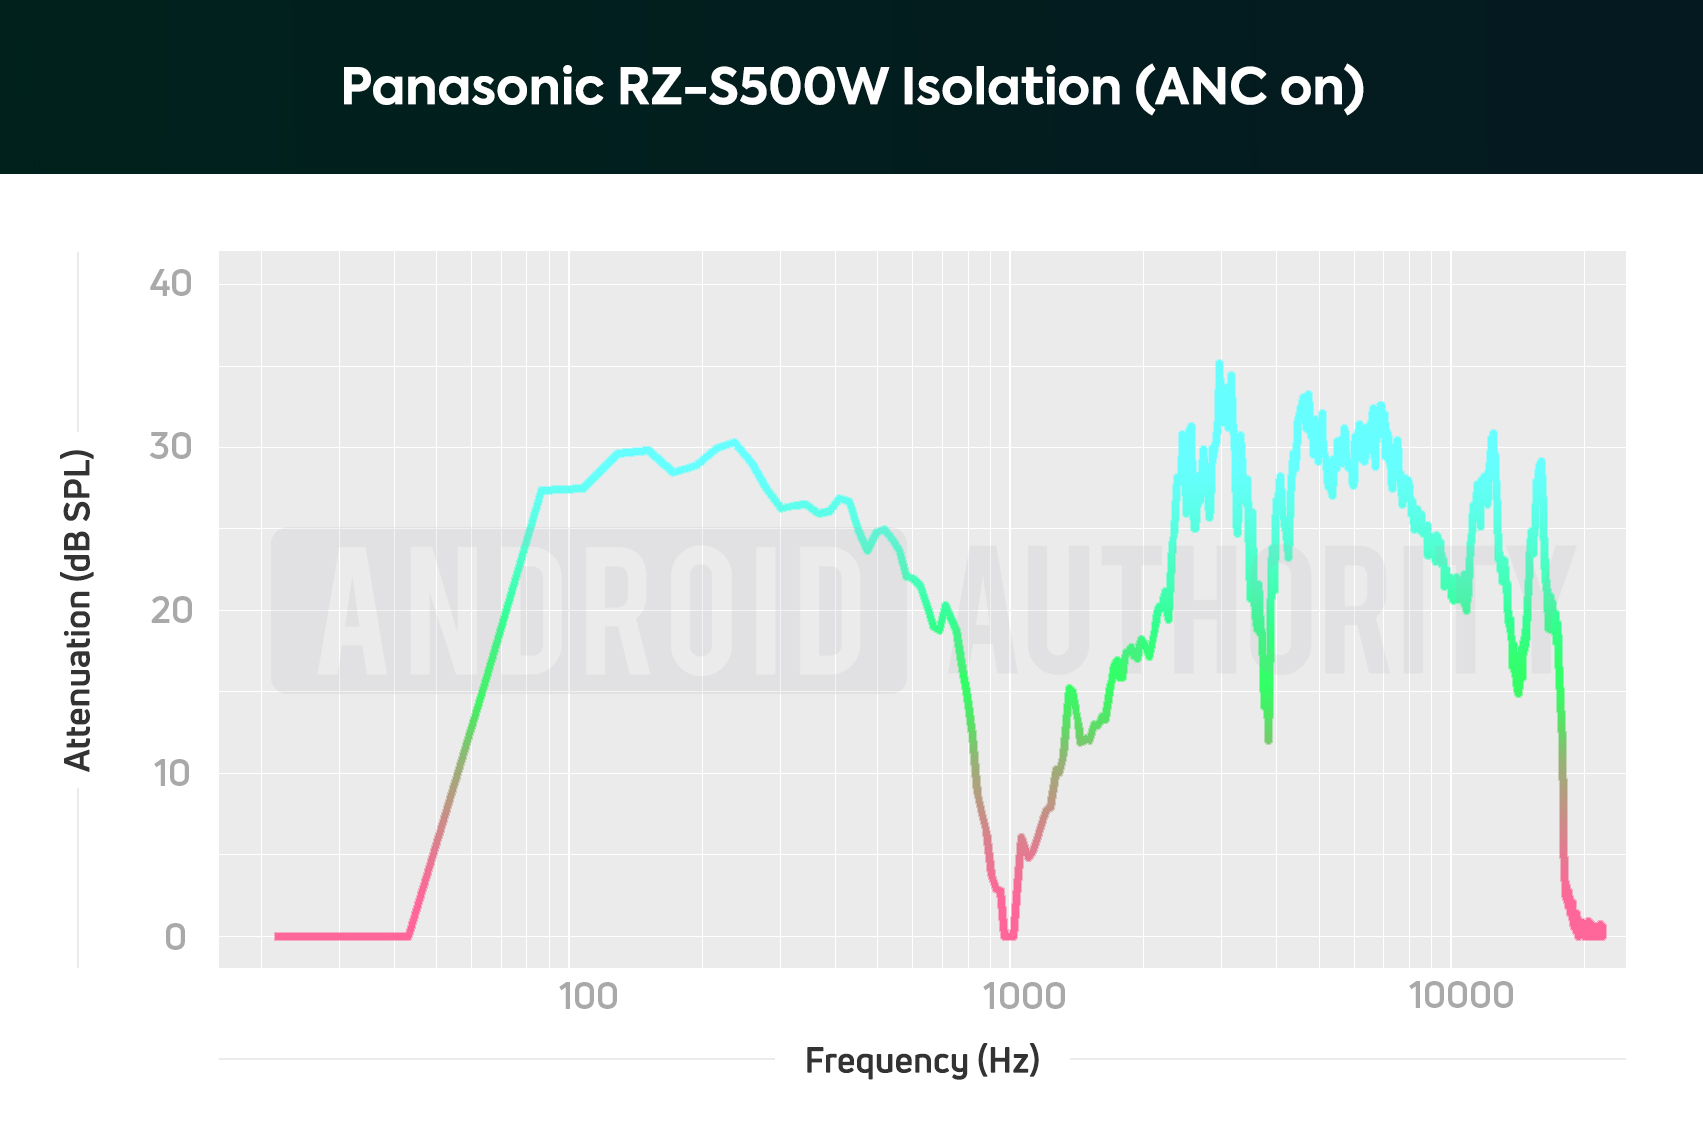 An isolation chart of the Panasonic RZ-S500W noise cancelling earbuds with ANC on; bass and low-midrange sounds are heavily attenuated.